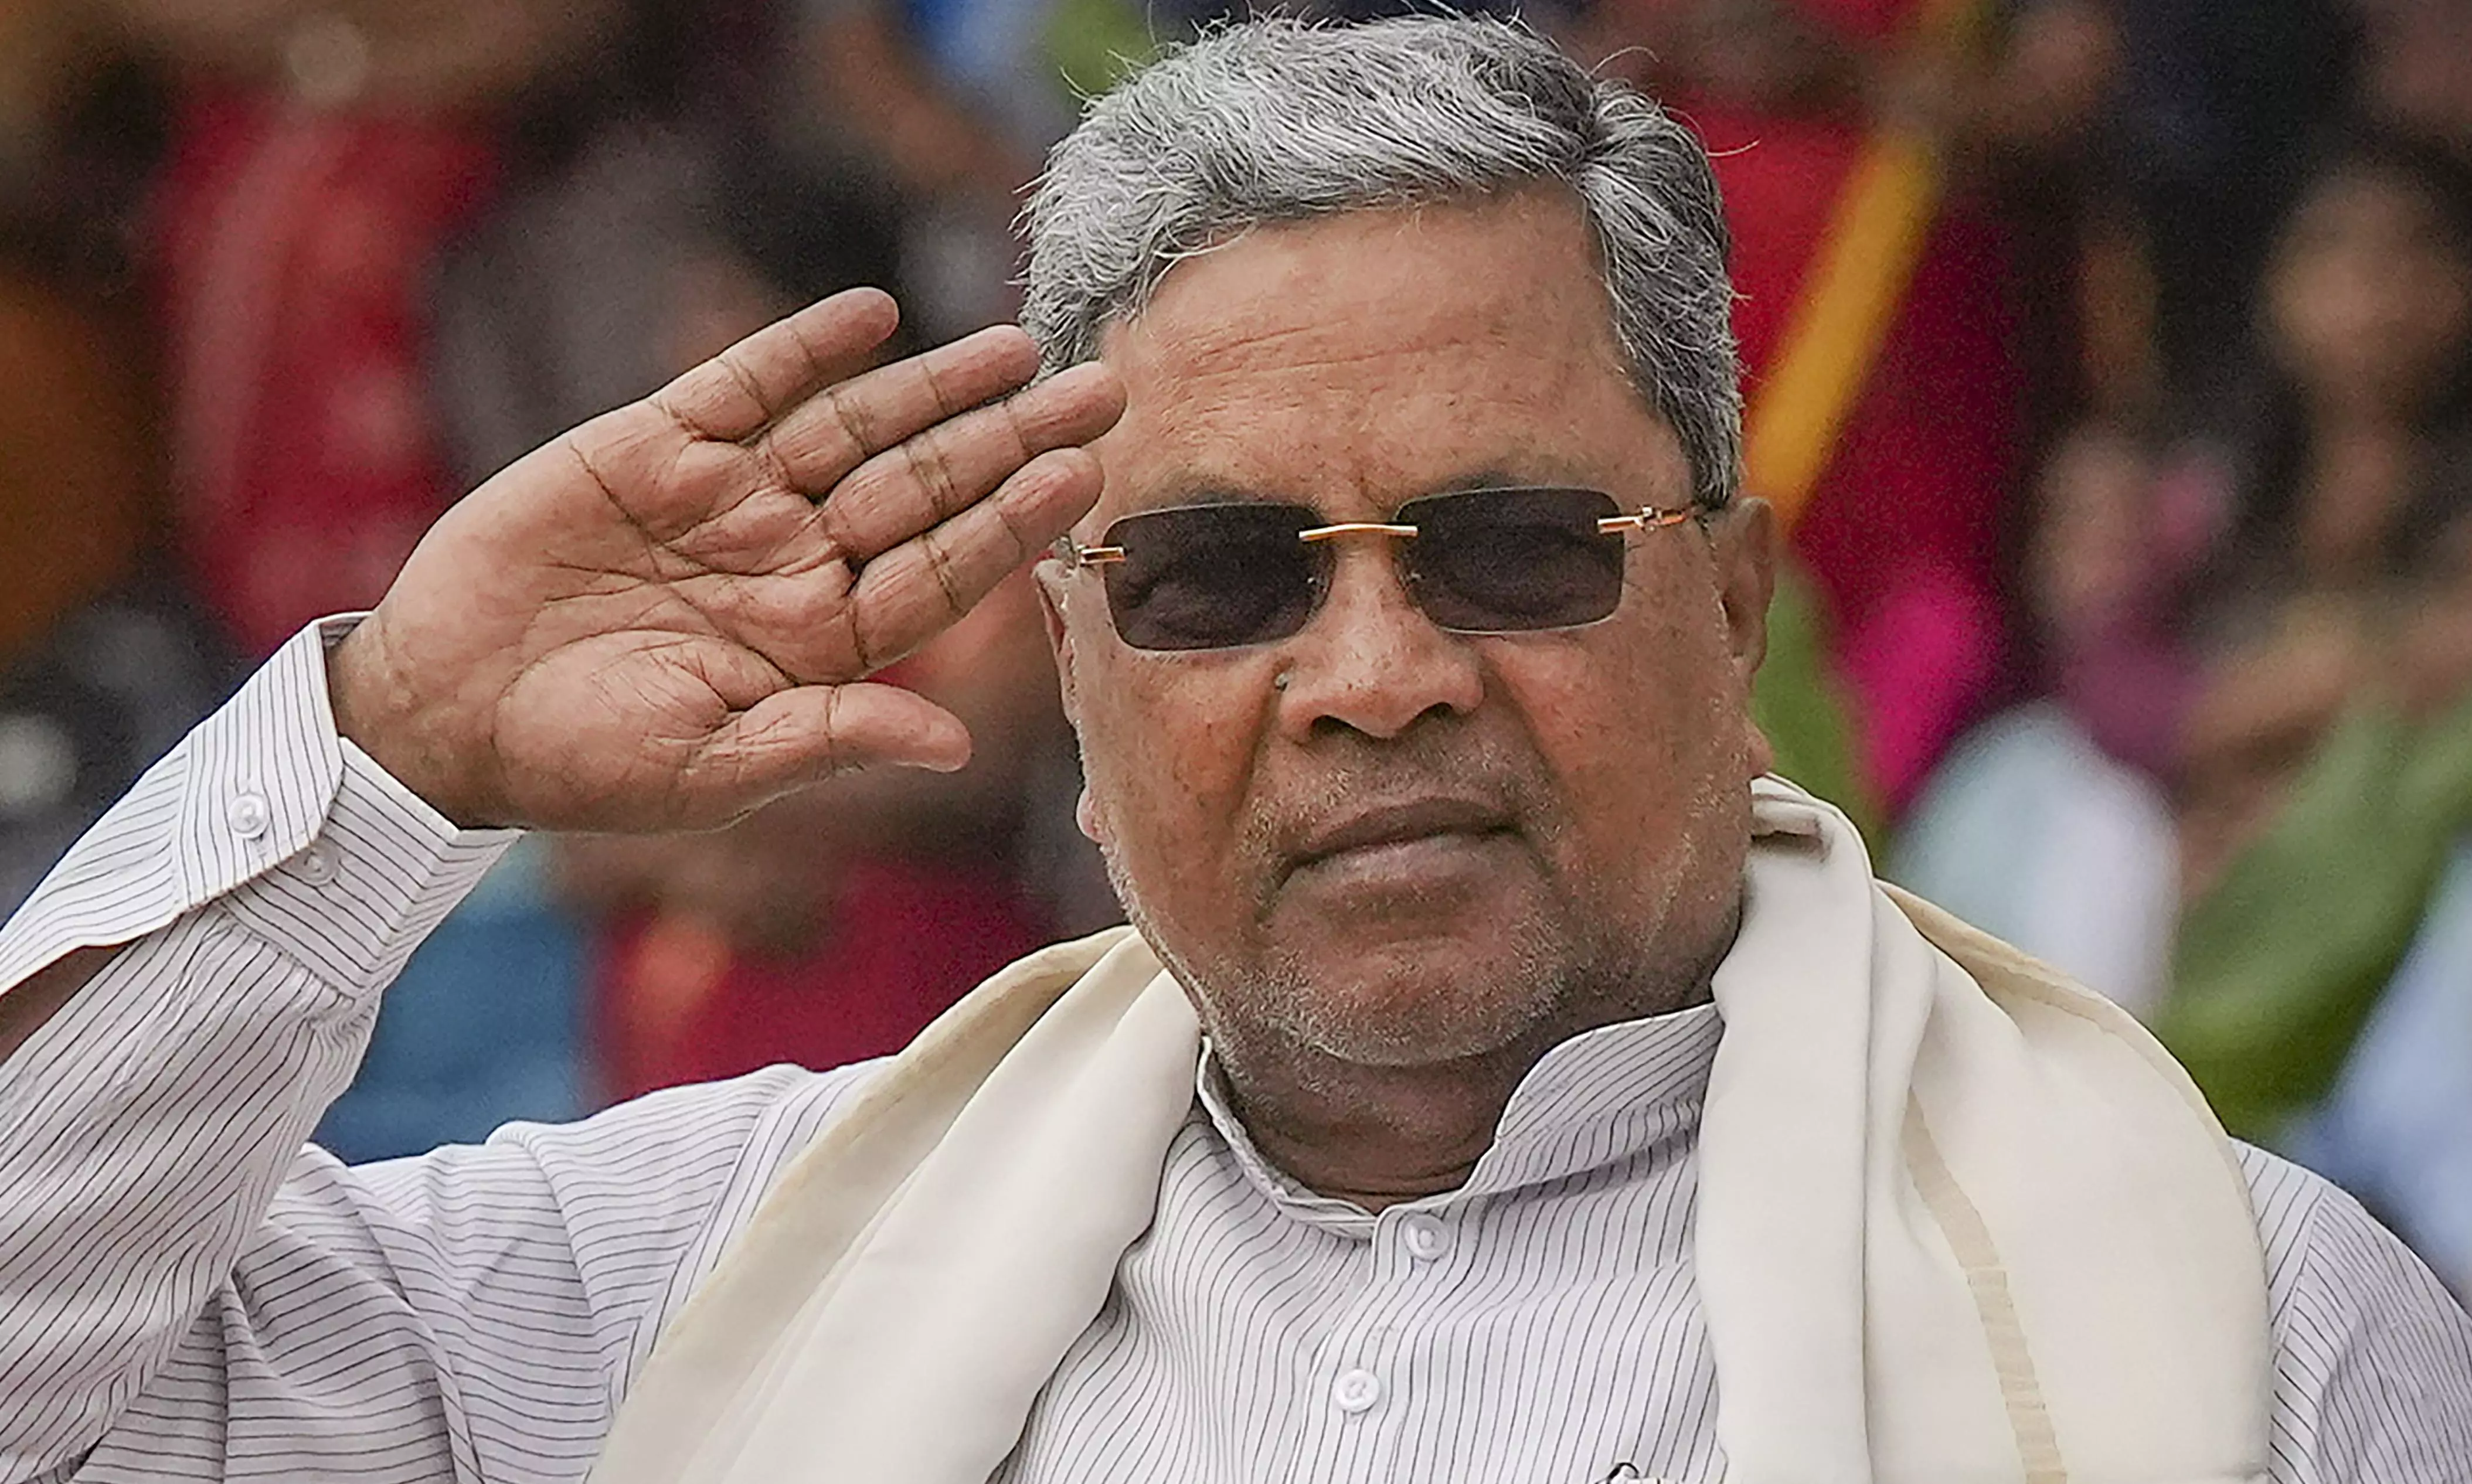 Will stay as CM for 5 years: Siddaramaiah dismisses reports of change after 2.5 years